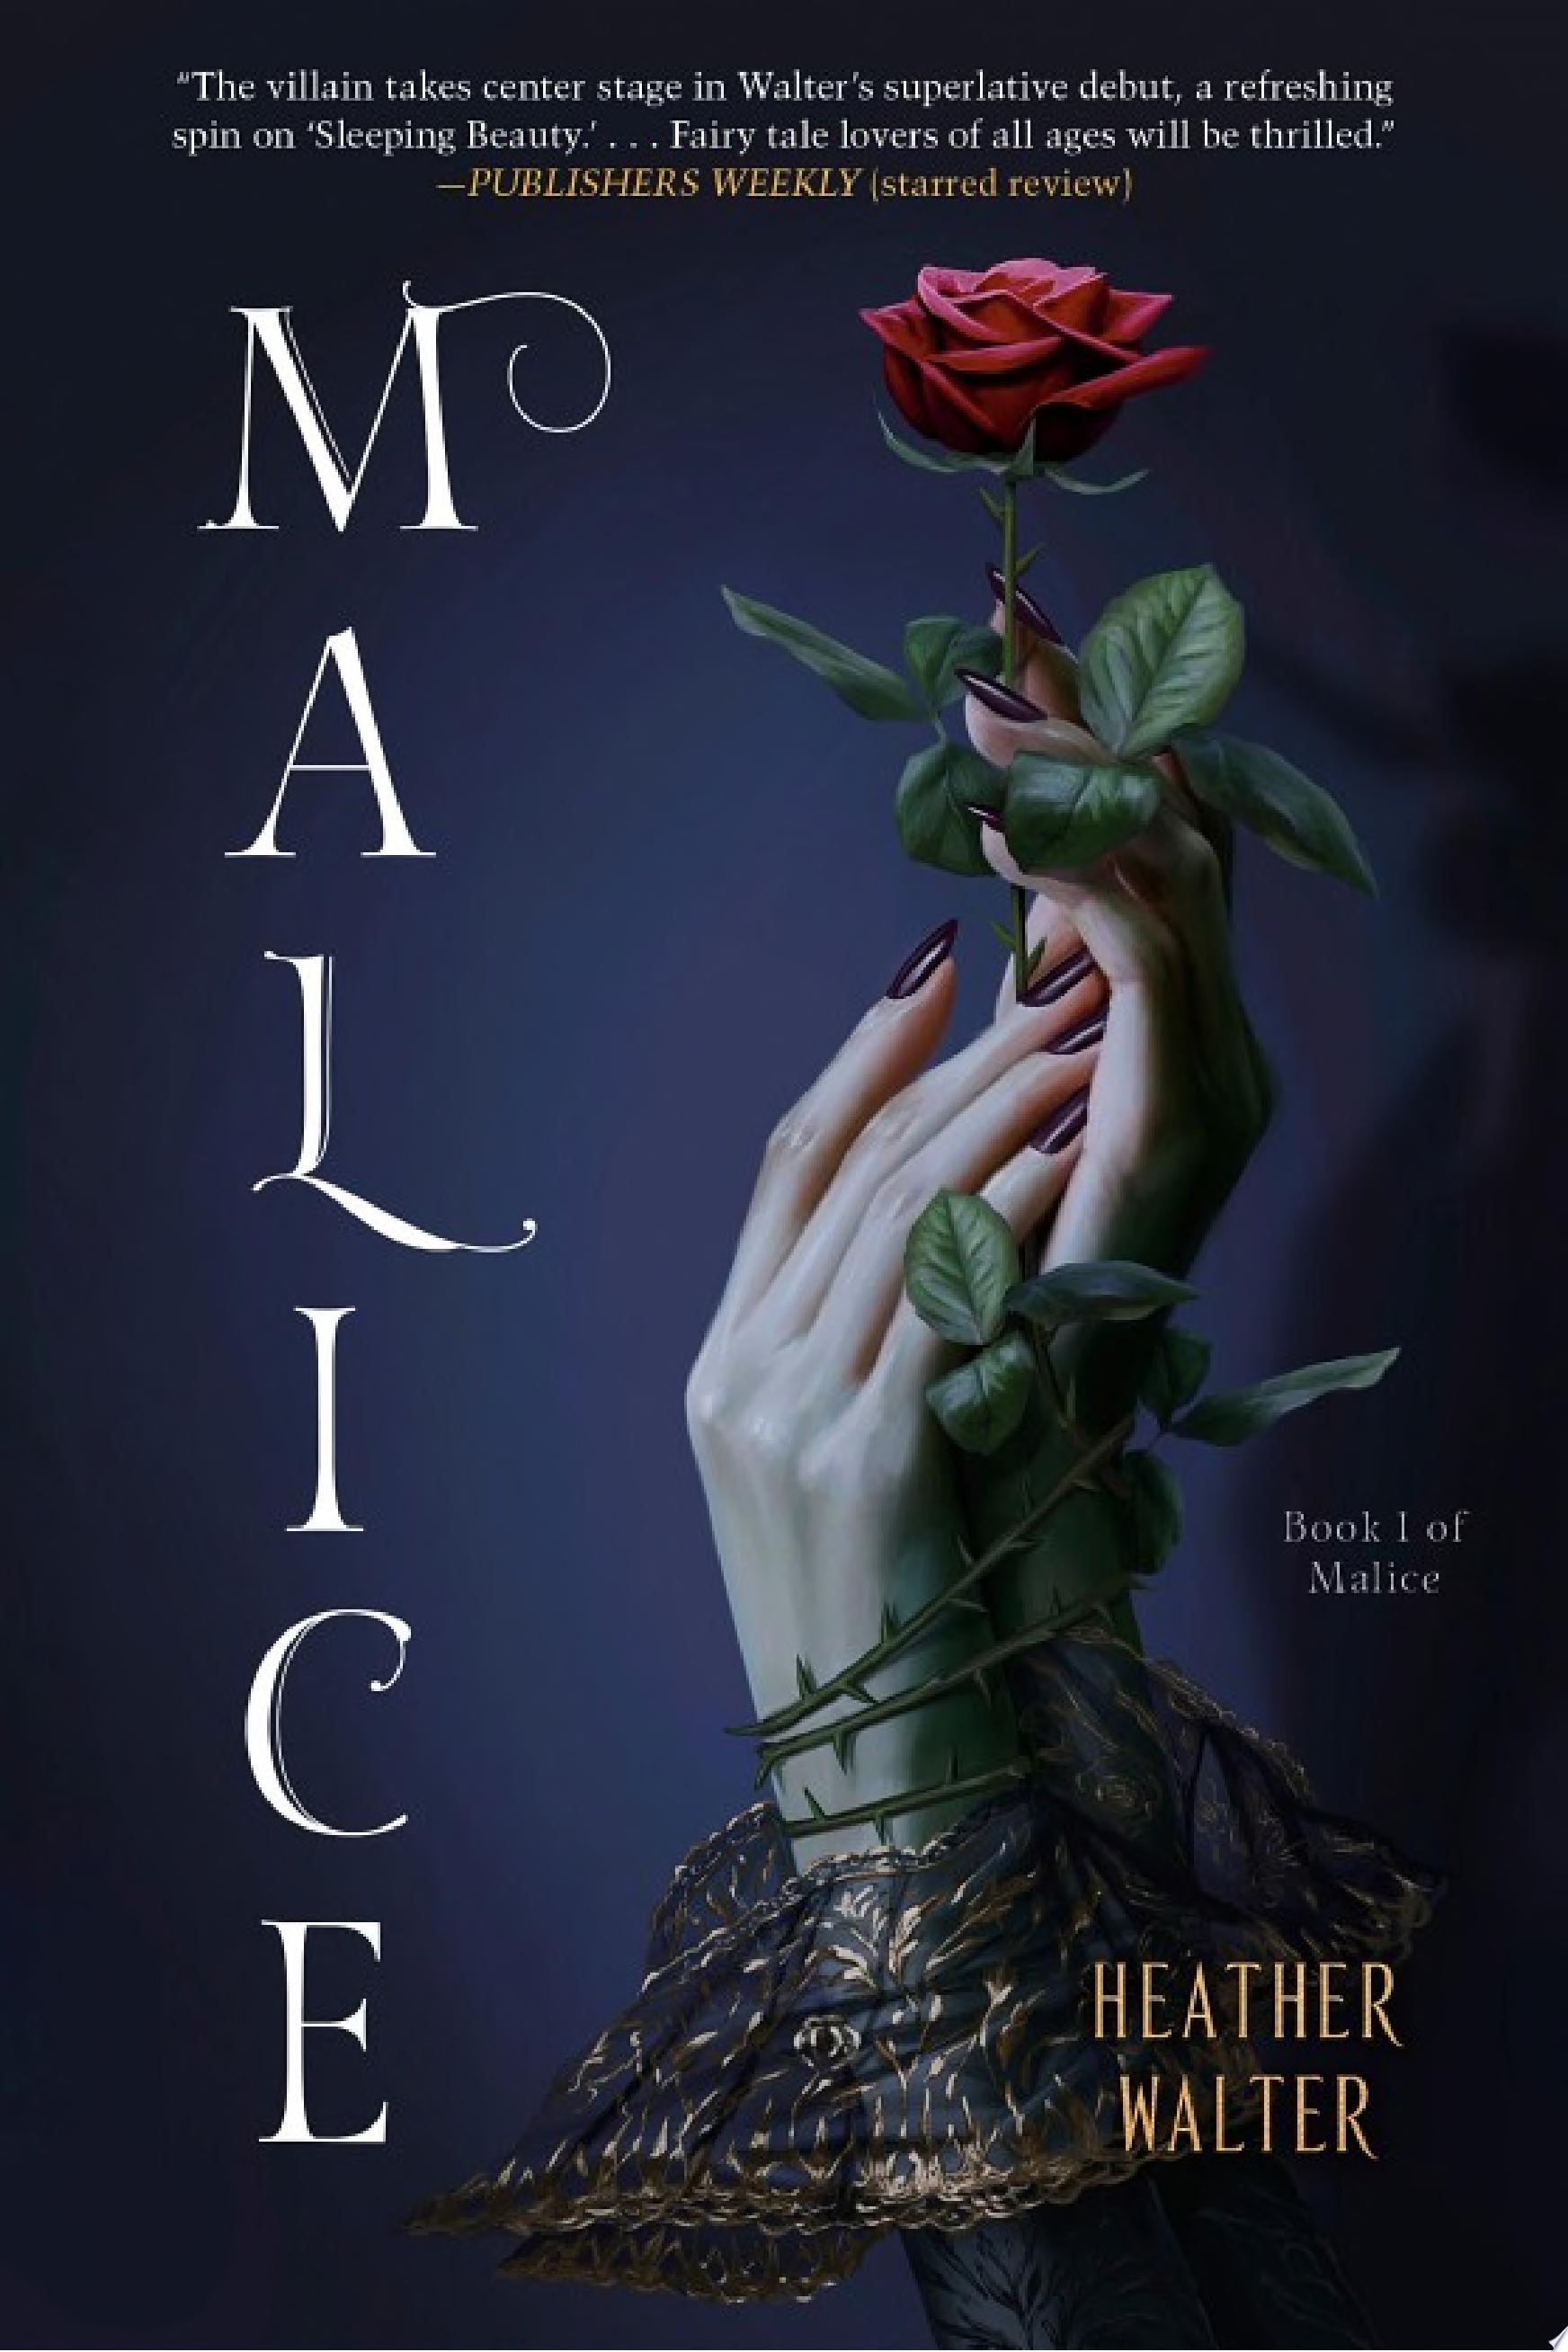 Image for "Malice"